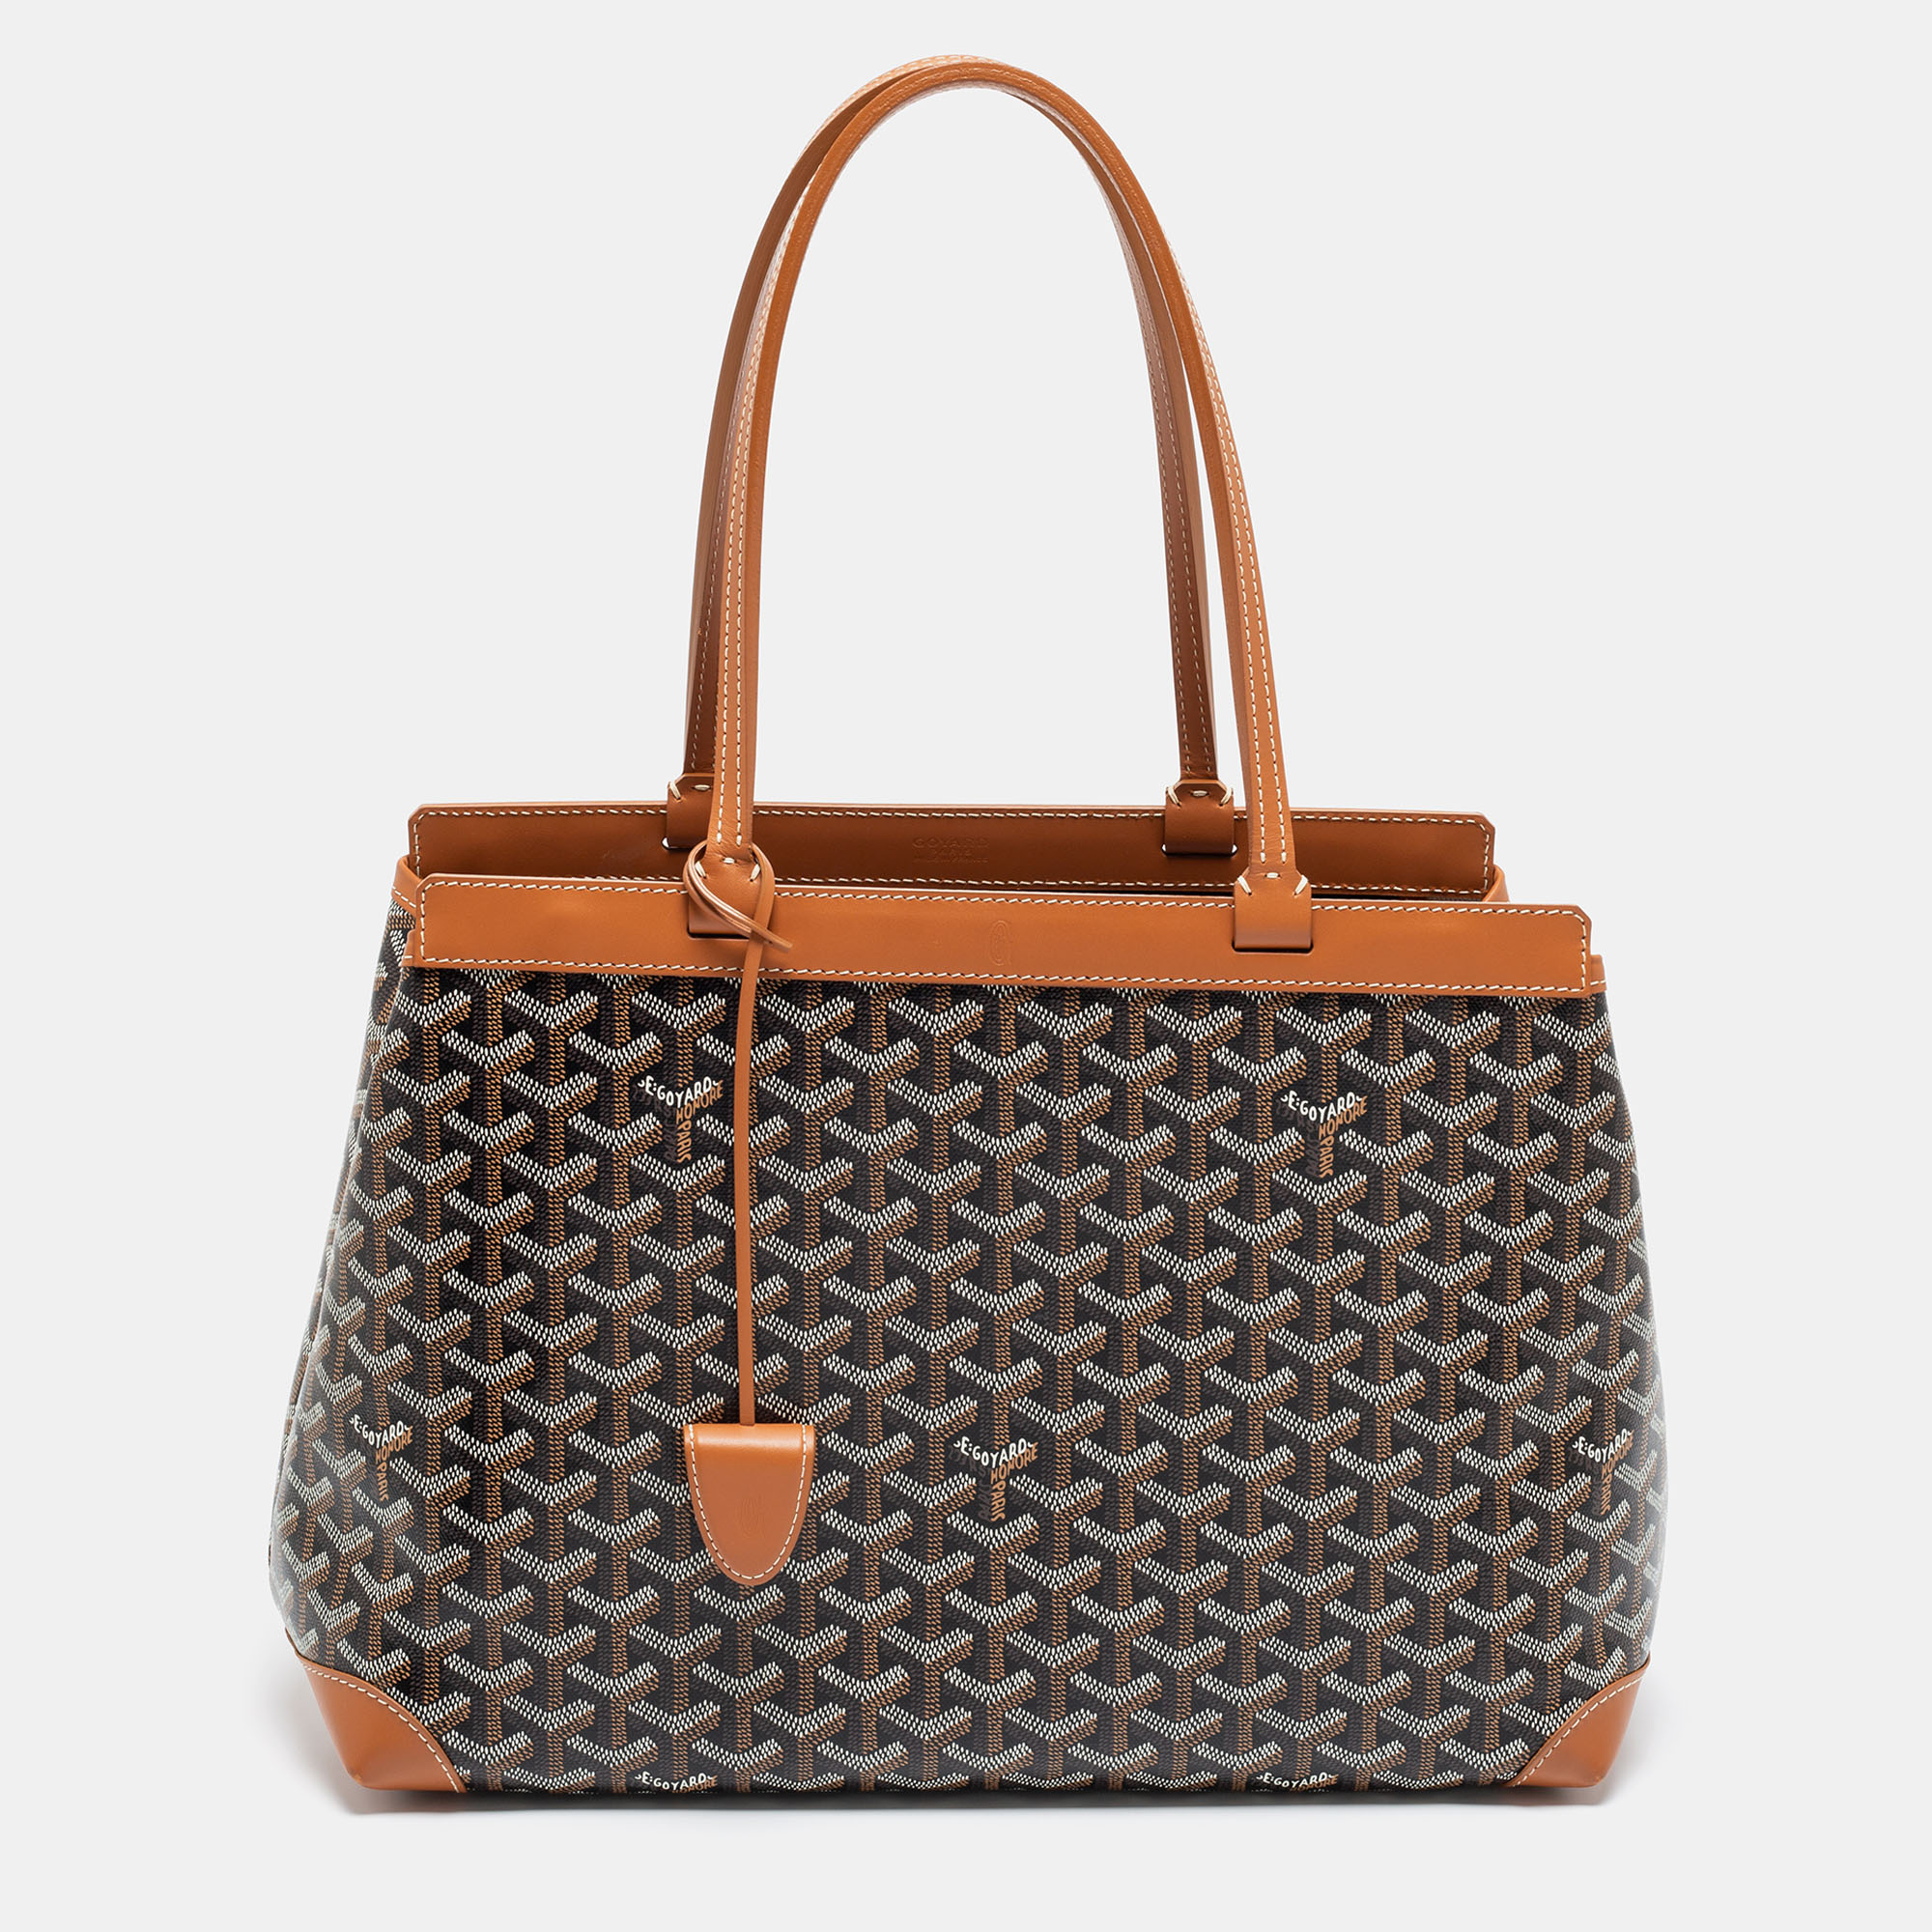 Goyard Tan Goyardine Coated Canvas and Leather Bellechasse PM Tote ...